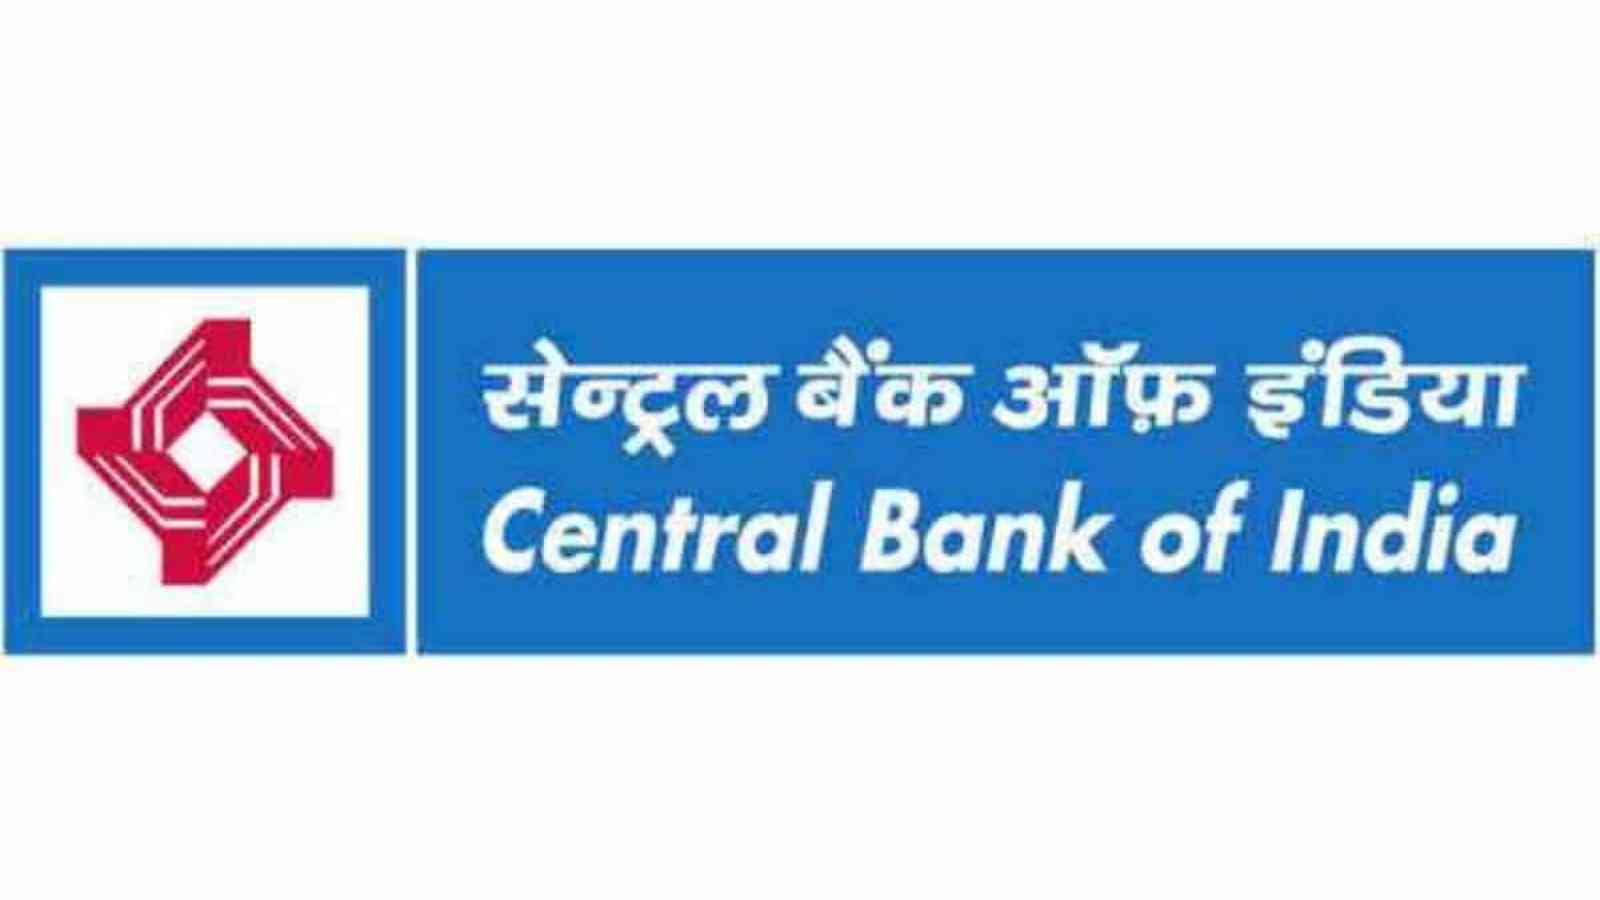 Central Bank of India Recruitment for Chief Manager Grade IV and Senior Manager Grade III